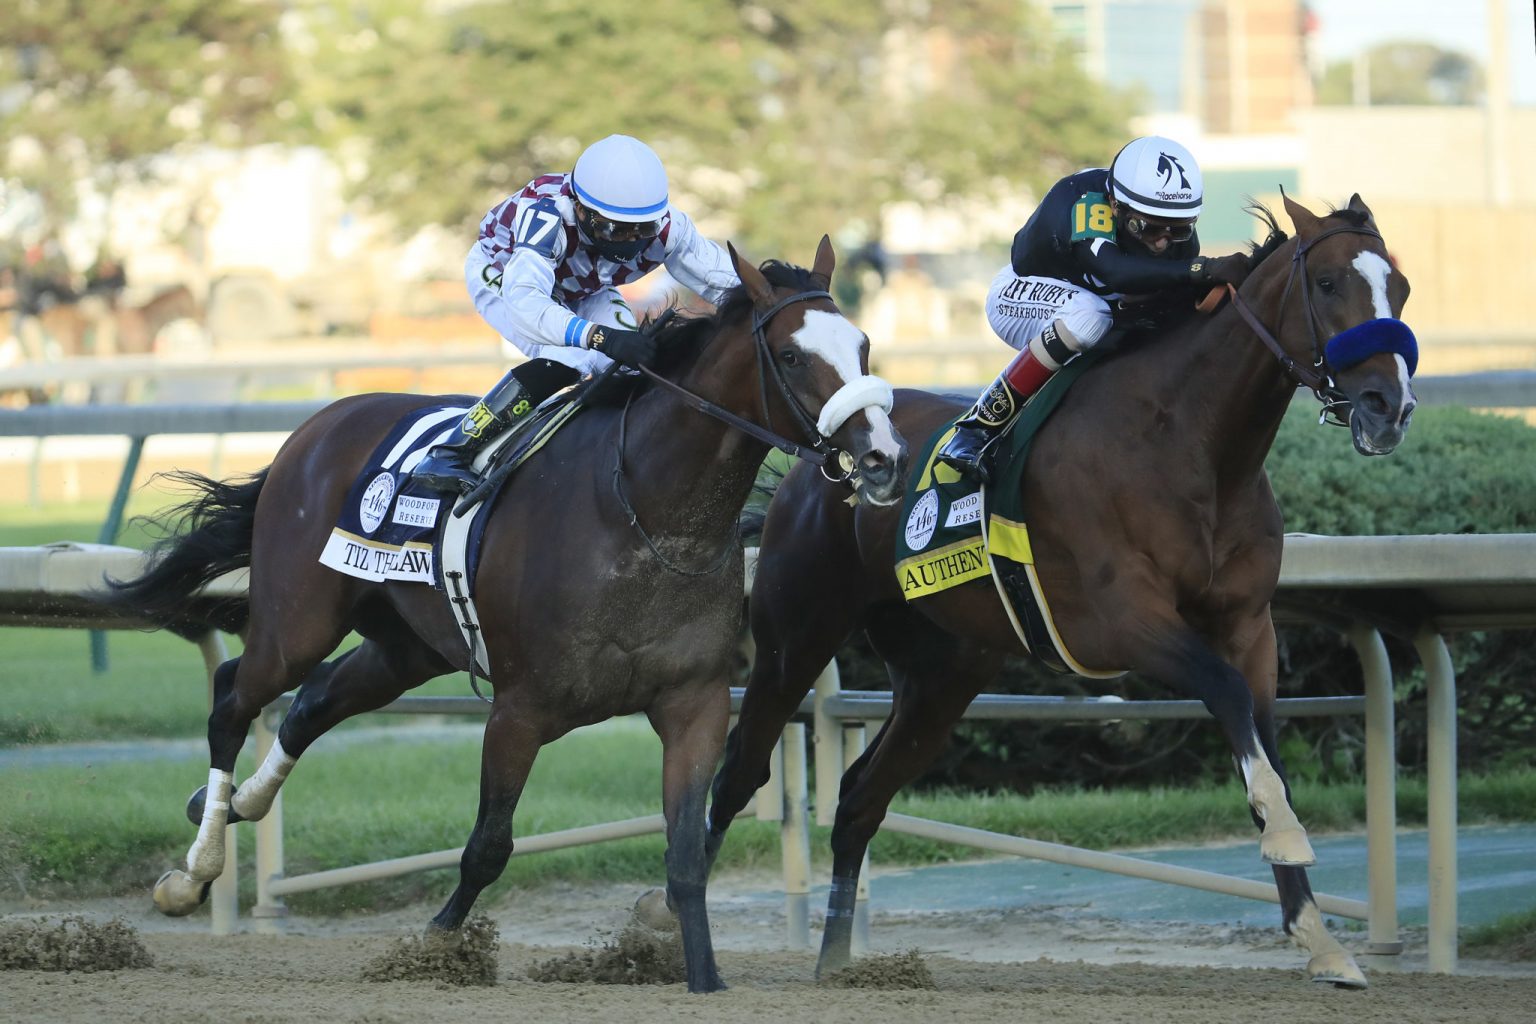 Breeders Cup Classic Features AllStar Field of Horse Racing Contenders